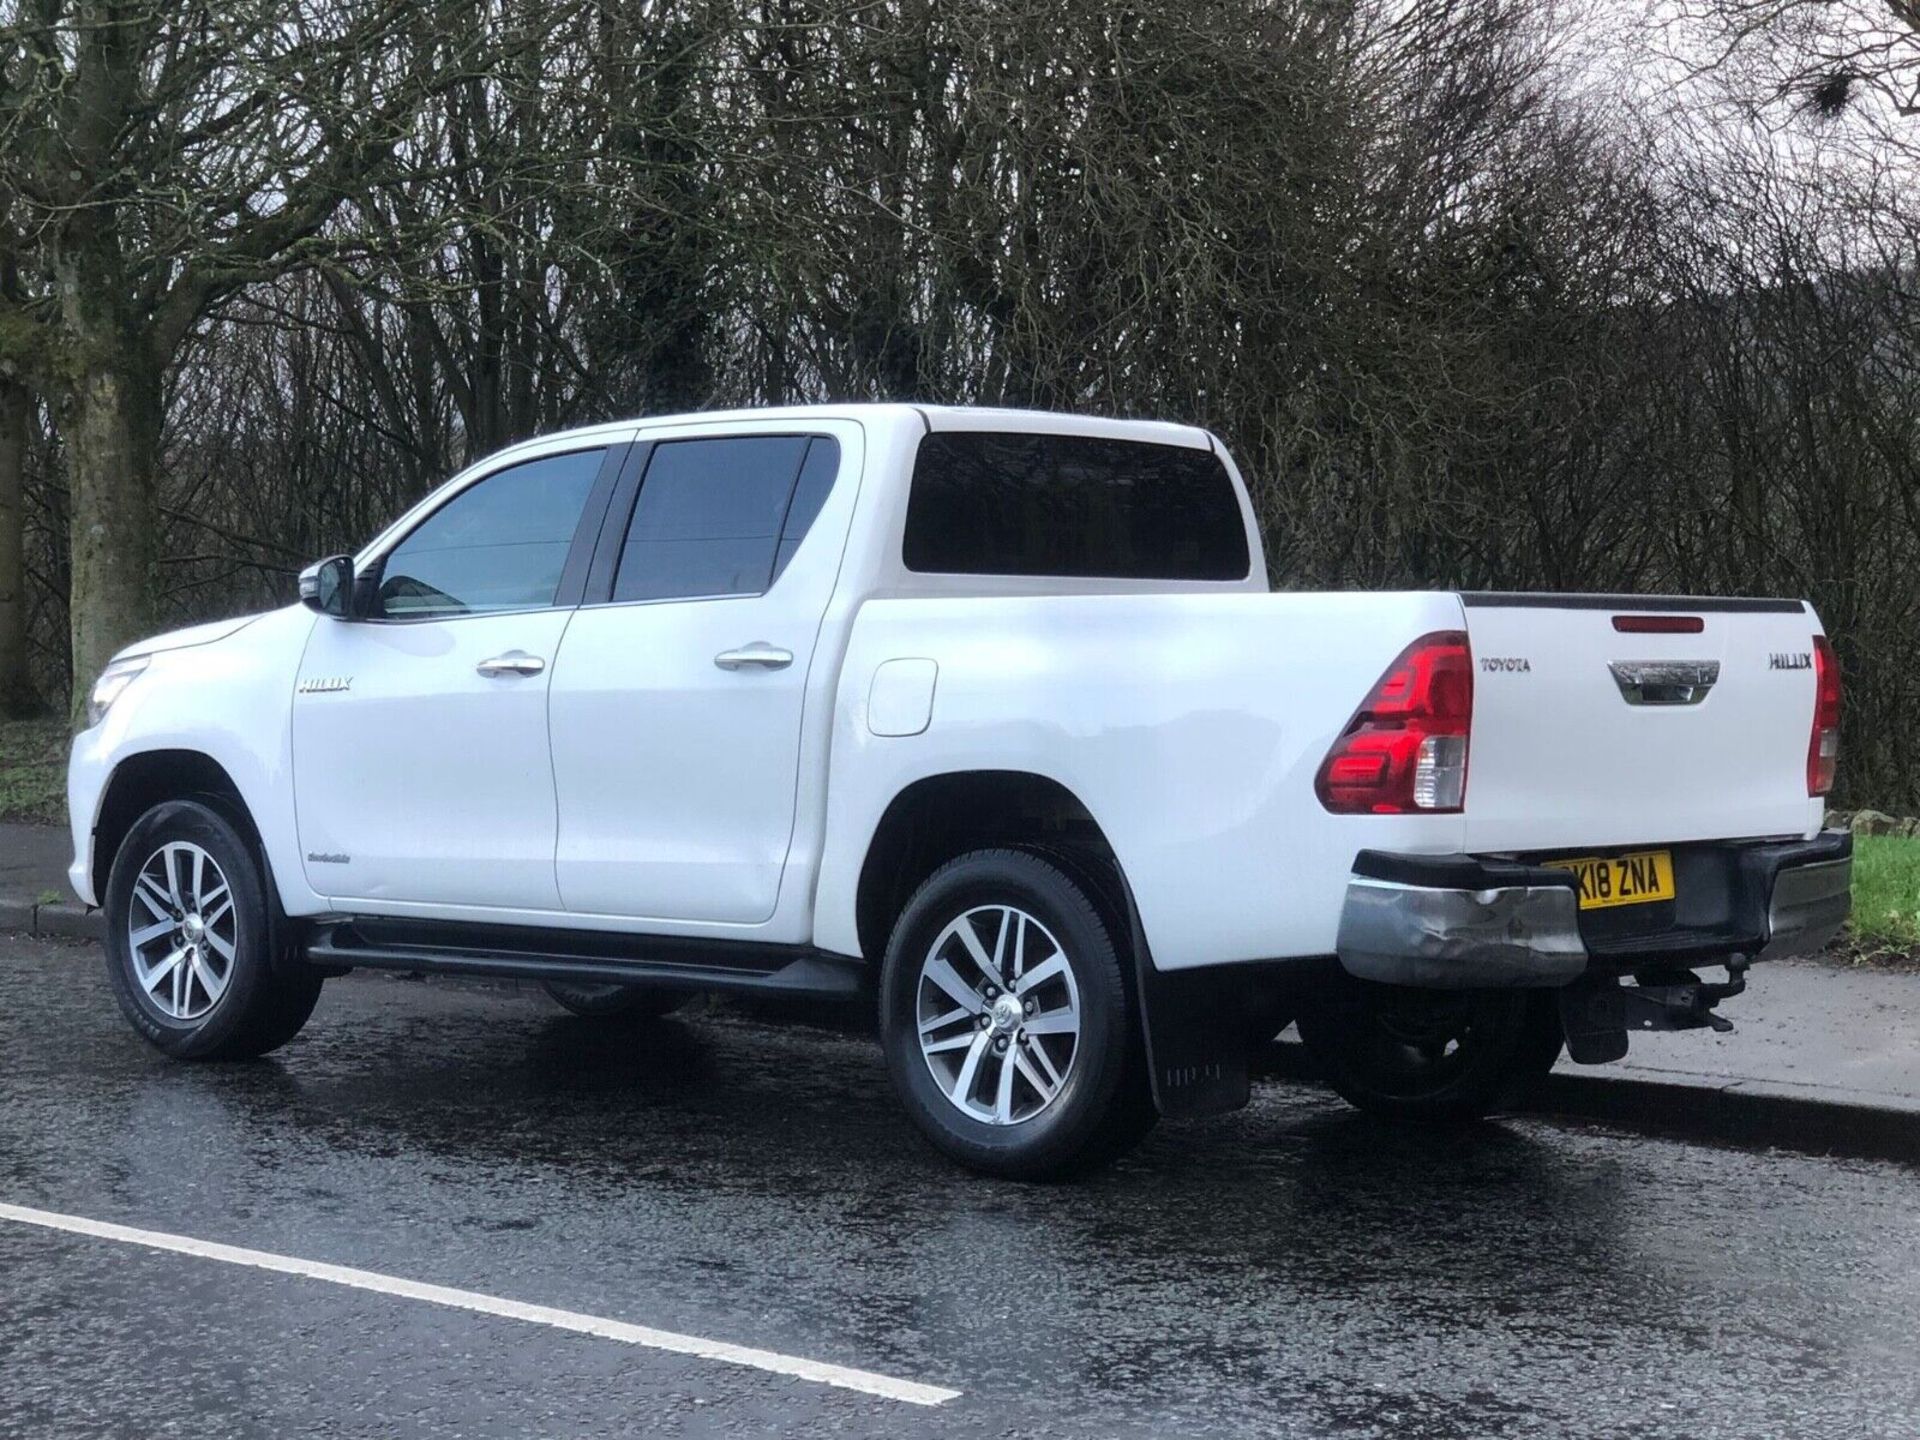 2018/18 TOYOTA HILUX 2.4 INVINCIBLE DOUBLE CAB - OFF-ROAD ADVENTURE READY>>--NO VAT ON HAMMER--<< - Image 5 of 14